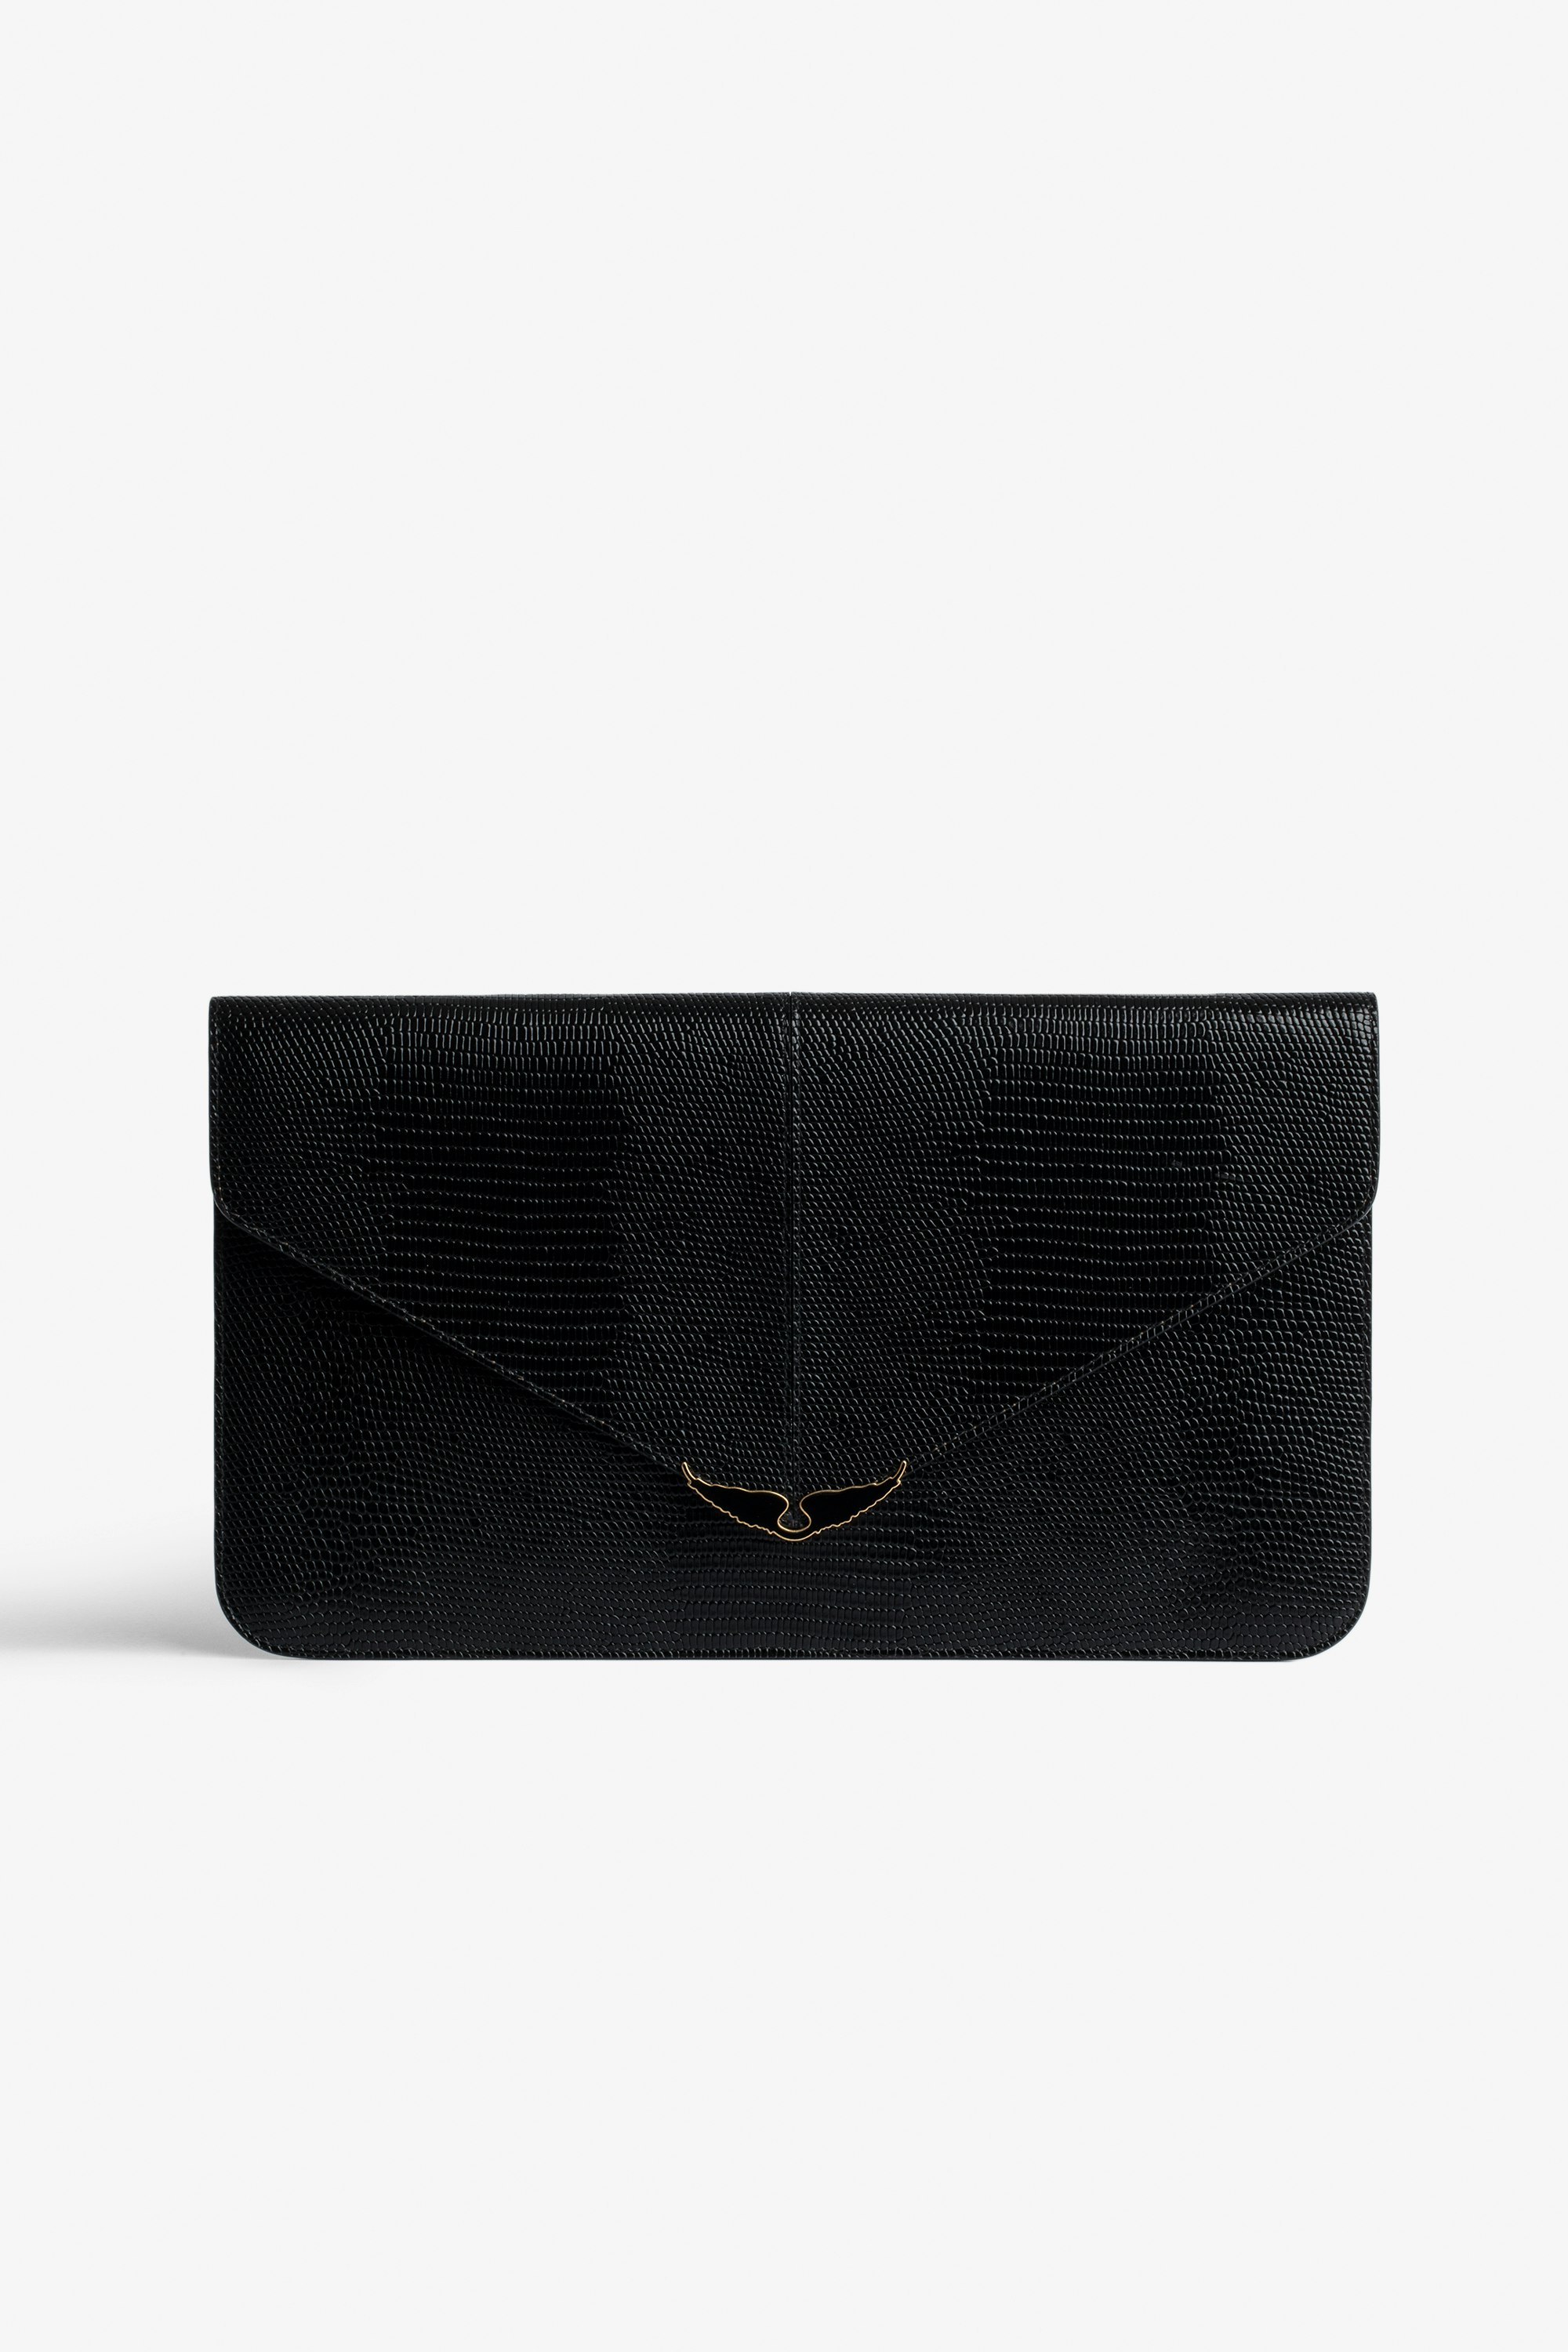 Borderline Clutch - Women’s envelope clutch in shiny black leather with embossed iguana, khaki suede interior, and black lacquered wings on the clasp